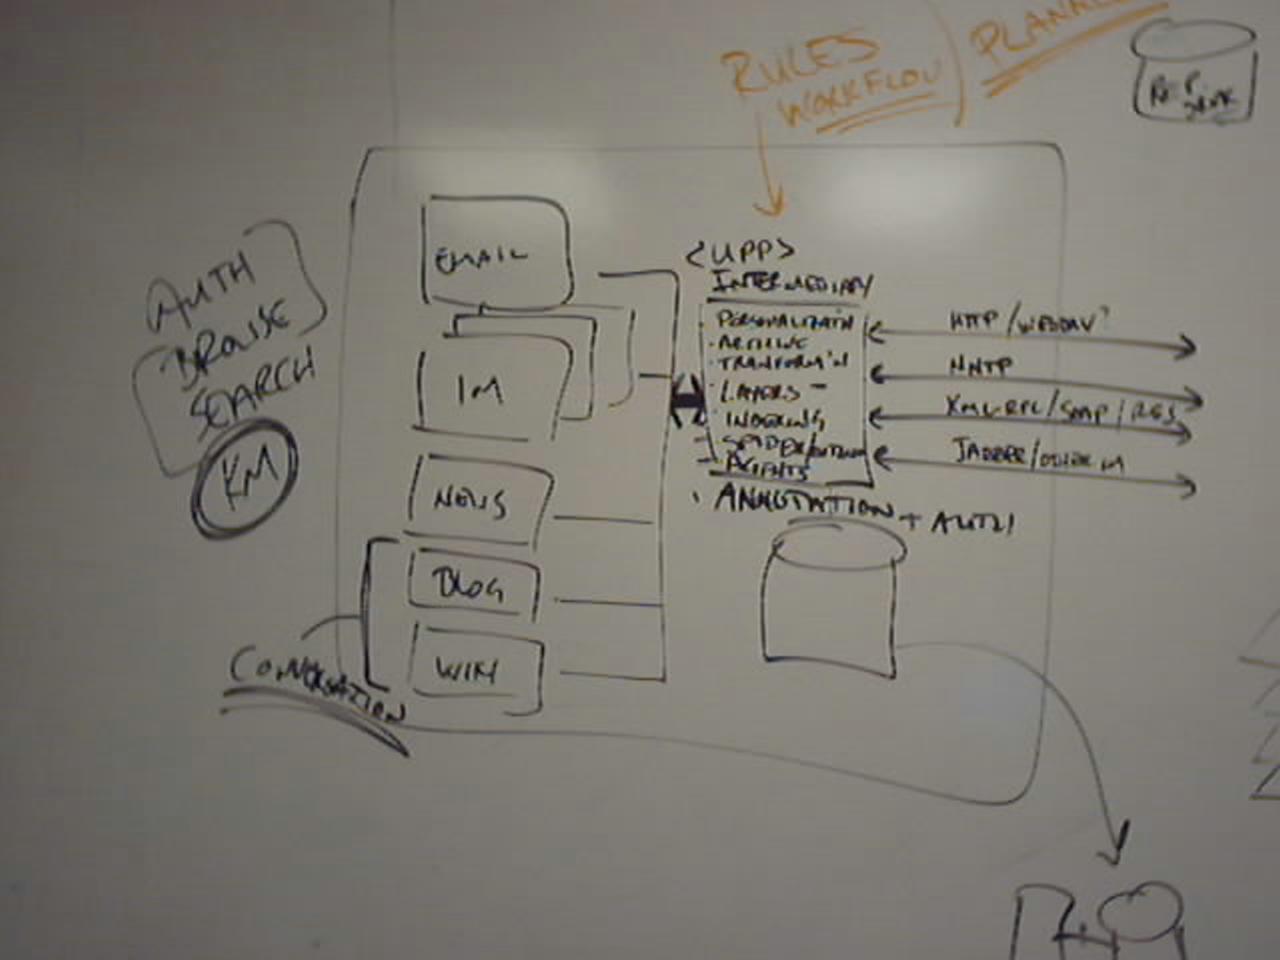 Whiteboard drawing of NewTool - an open source platform for Free Media and Microcontent + universal personal proxy/server + authoring and replication